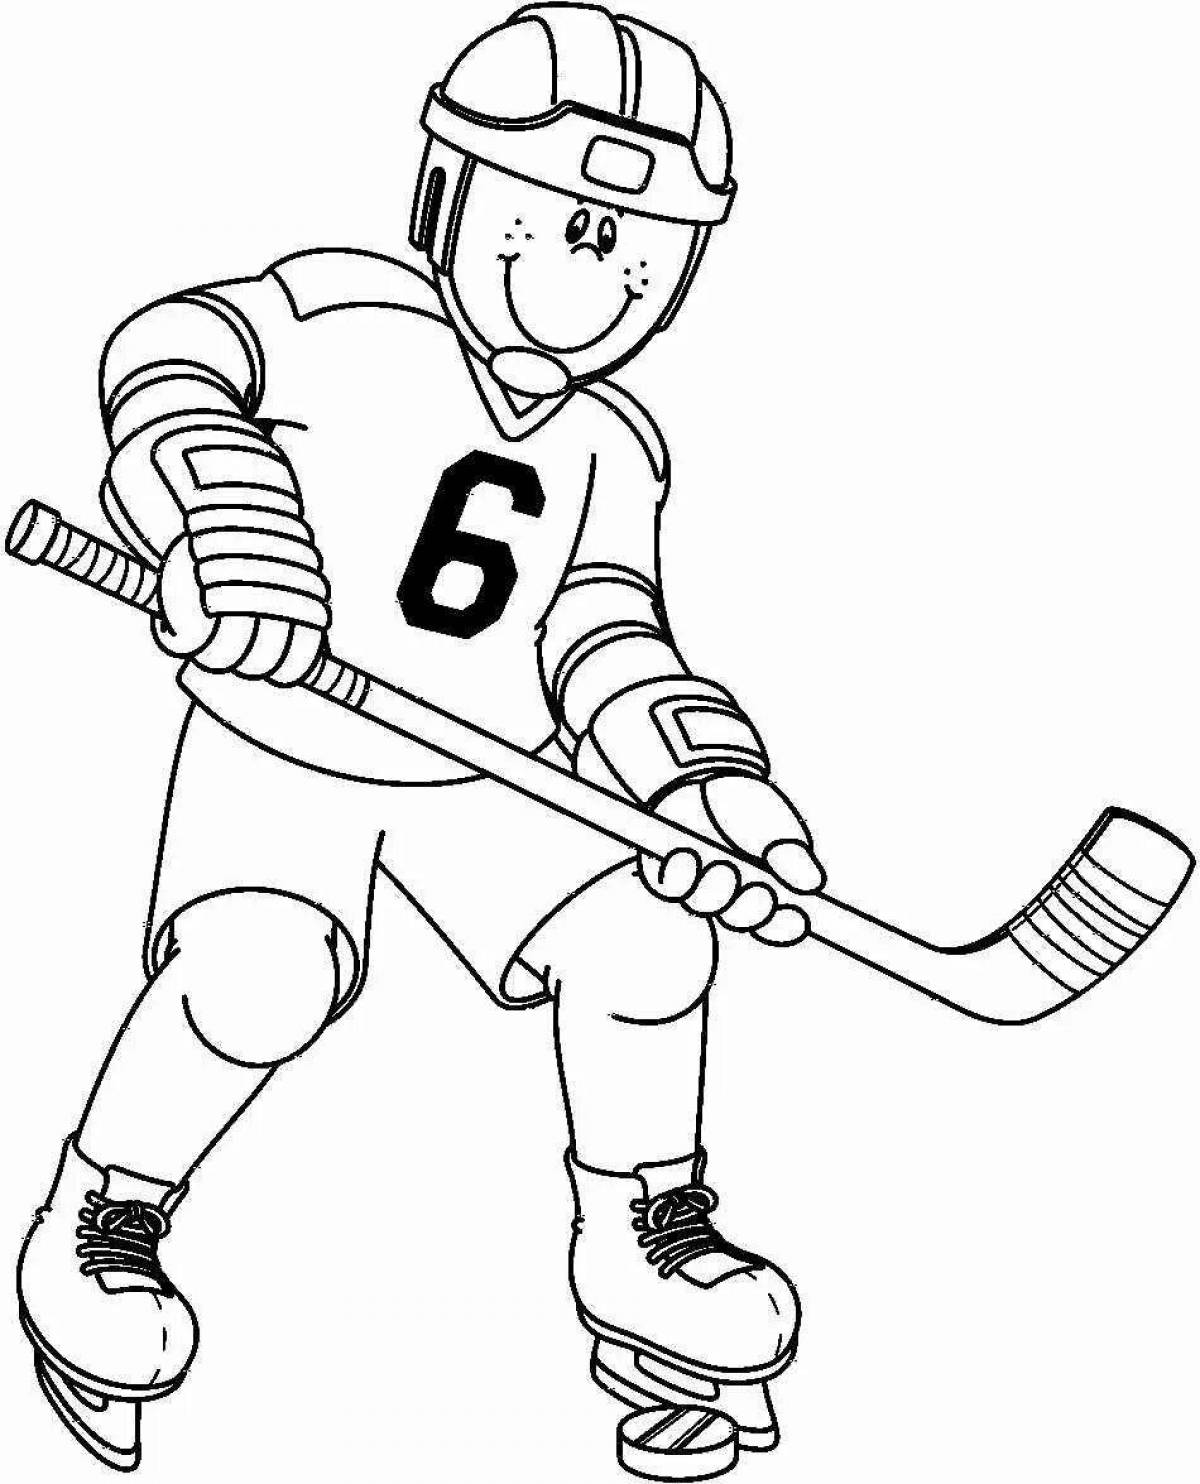 Spectacular hockey coloring book